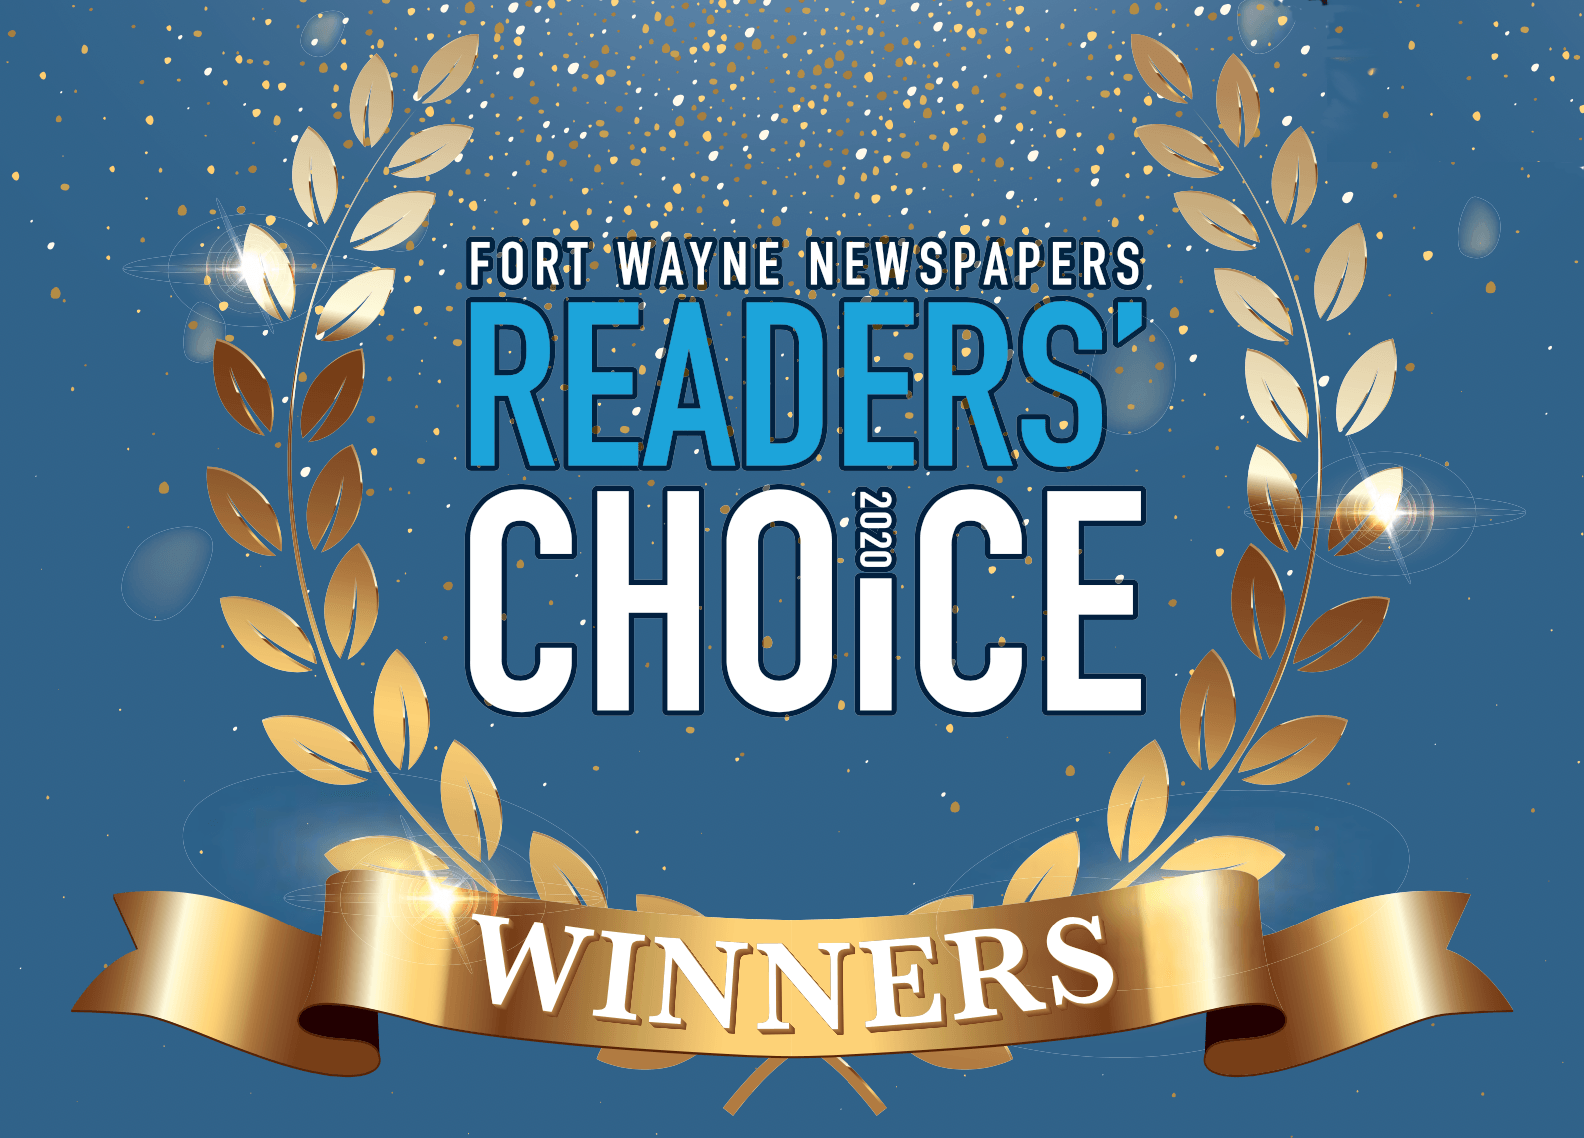 FairHaven Funeral Home voted #1 Readers' Choice 2020